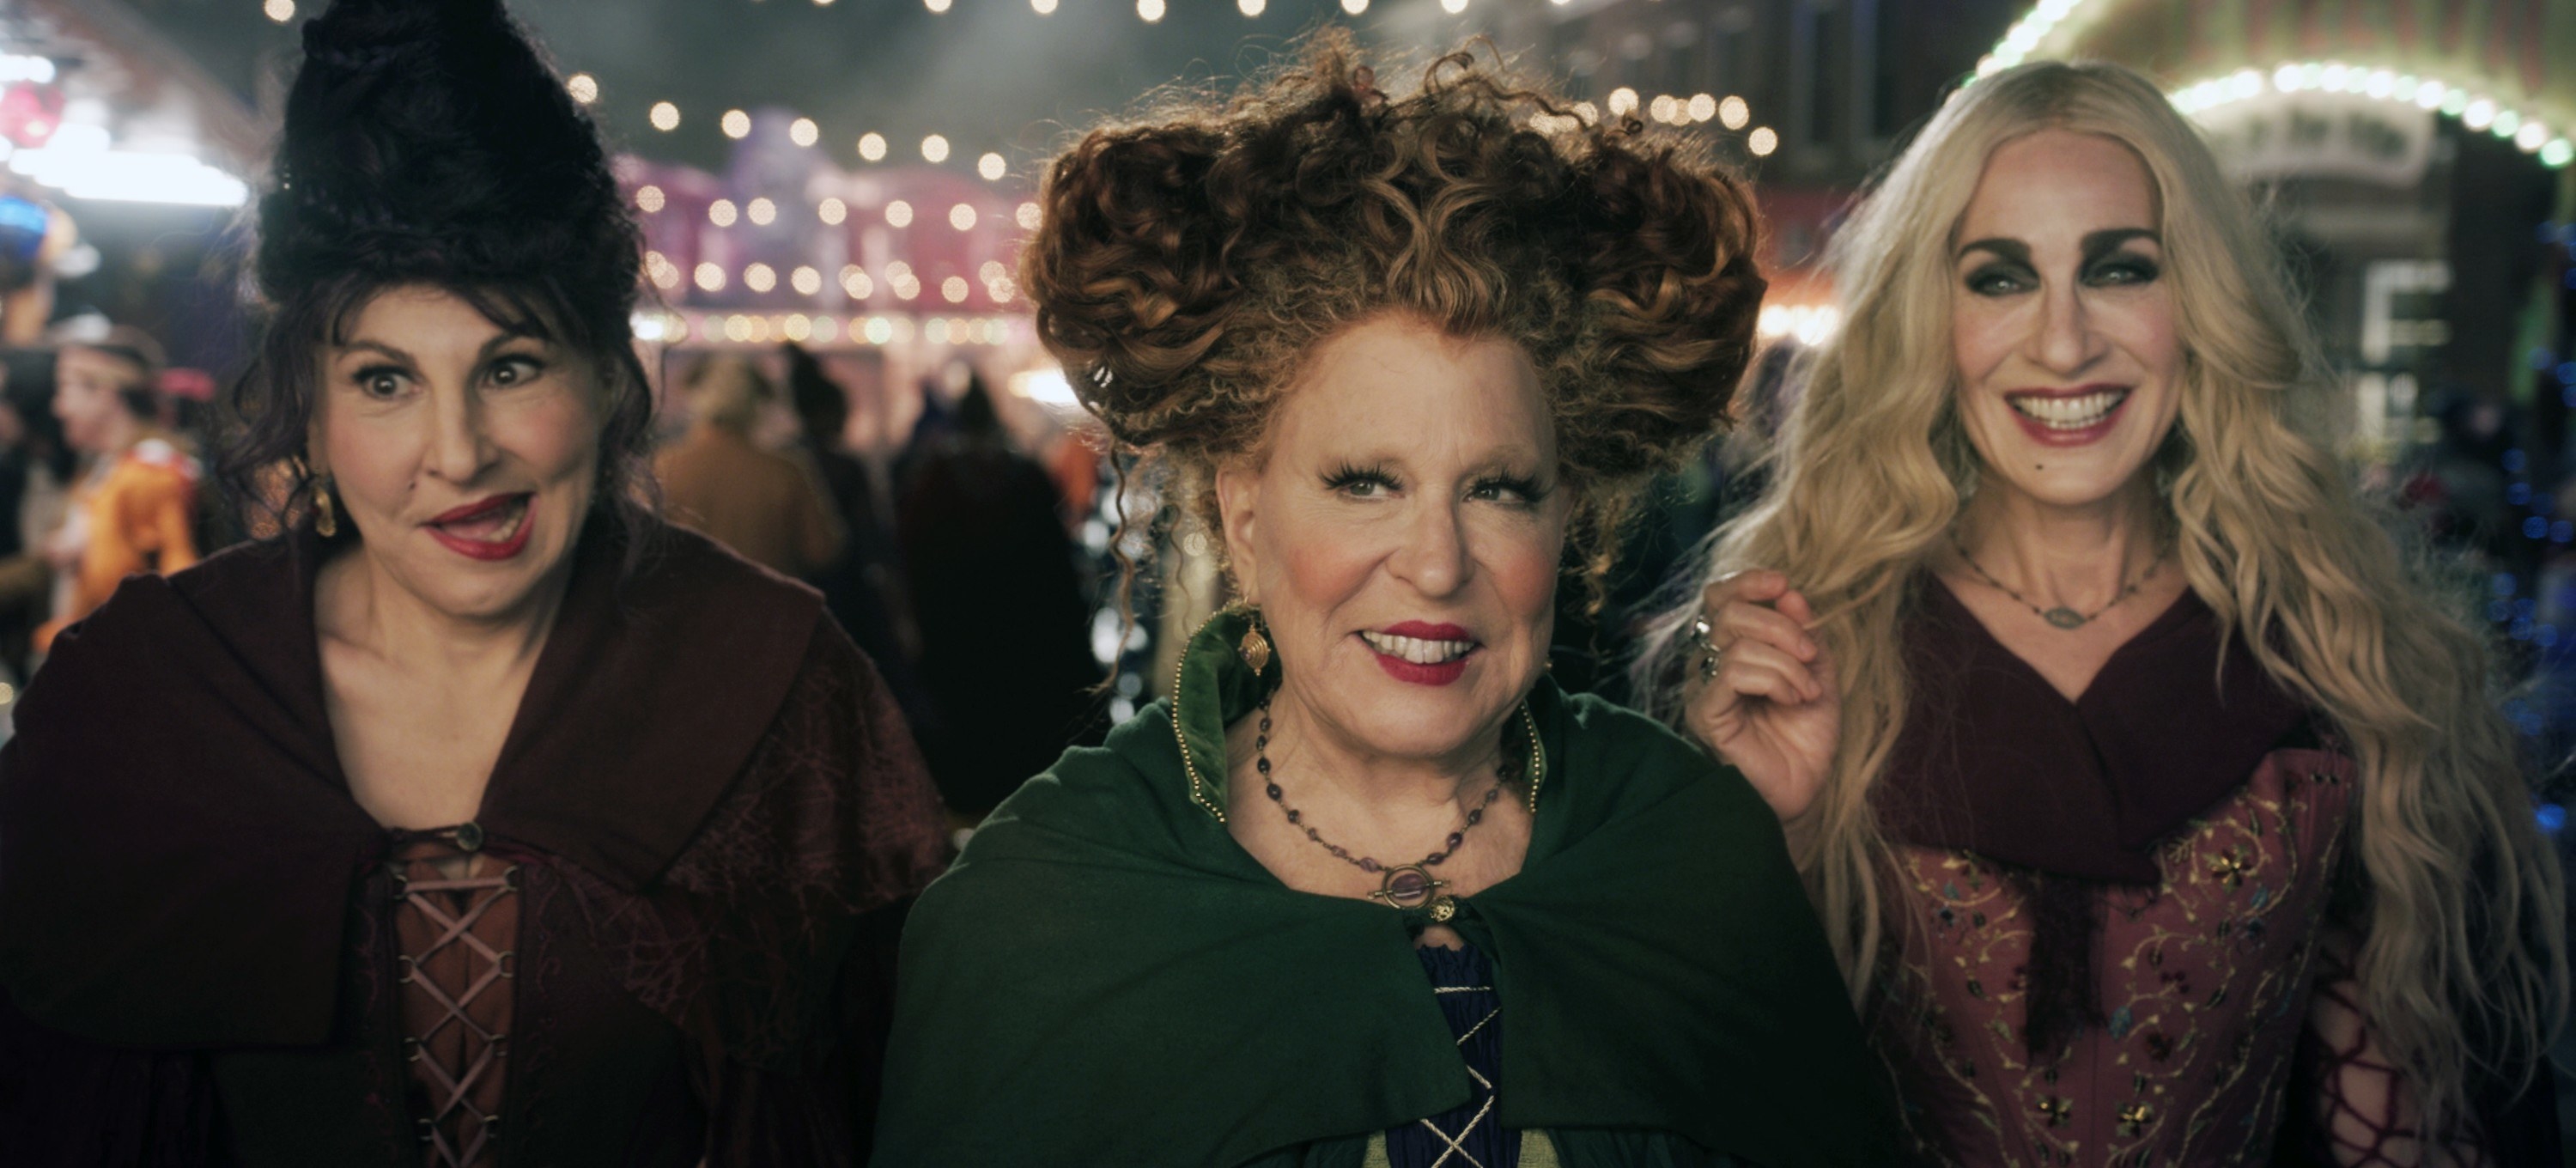 The Sanderson sisters smiling